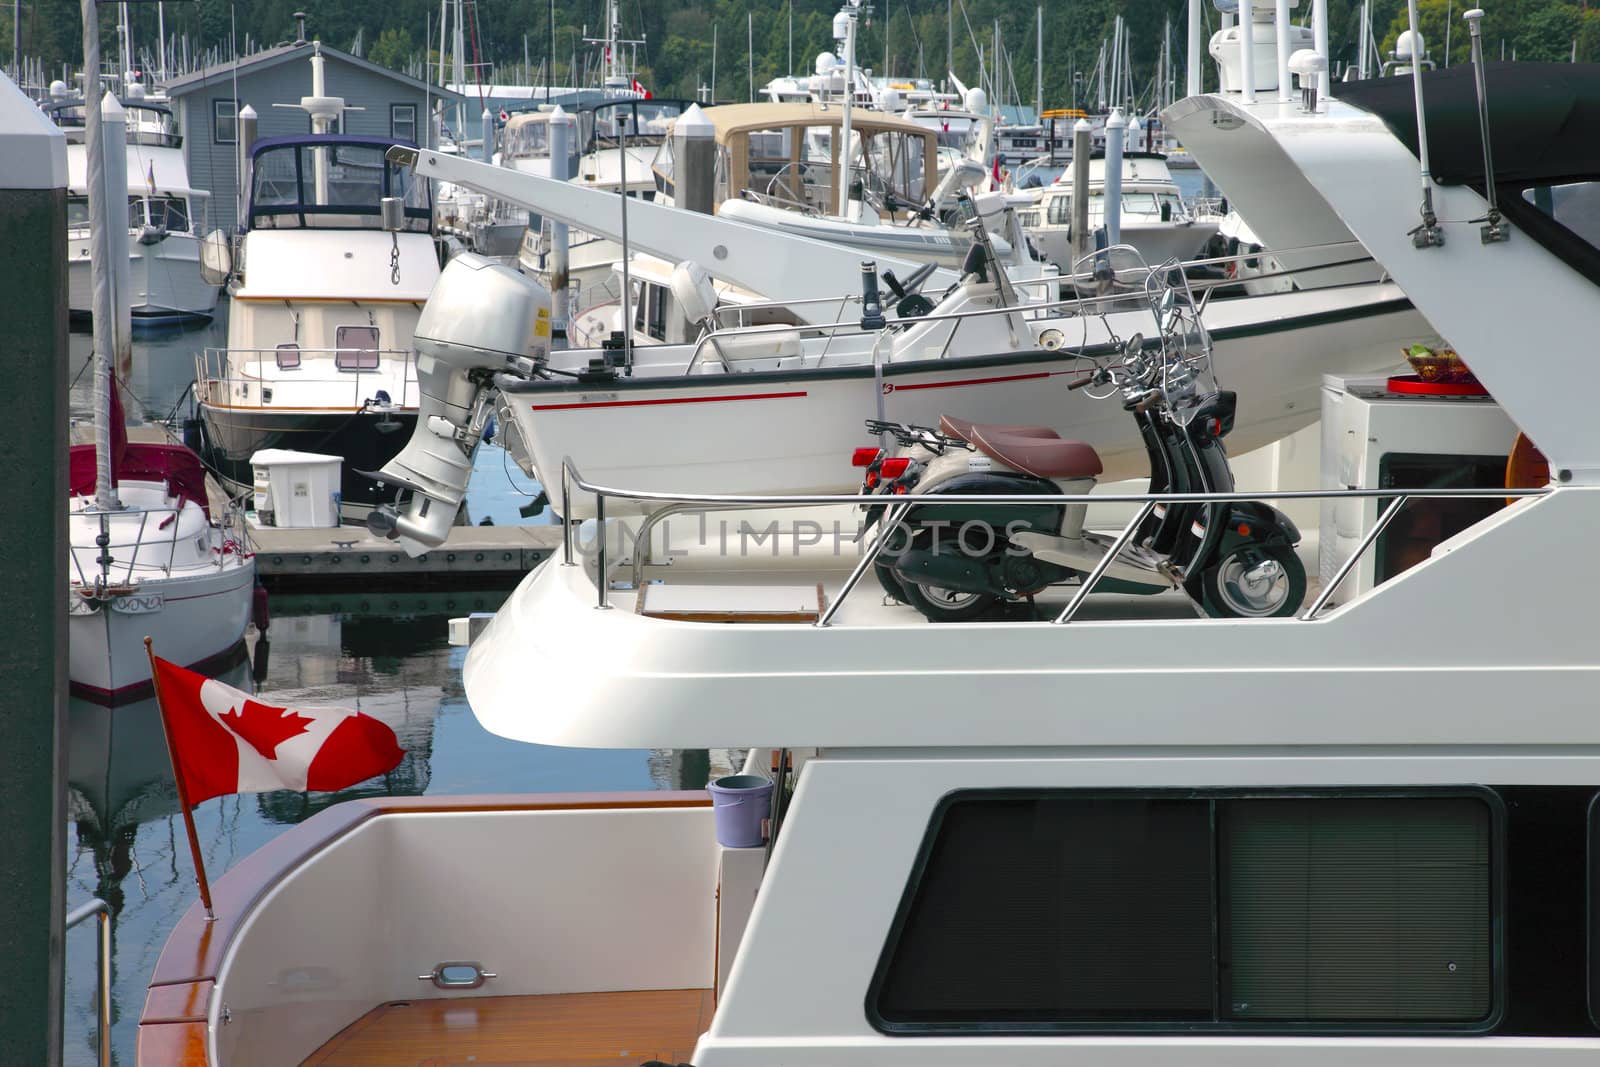 Two scooters on a yacht, Vancouver BC. Canada. by Rigucci